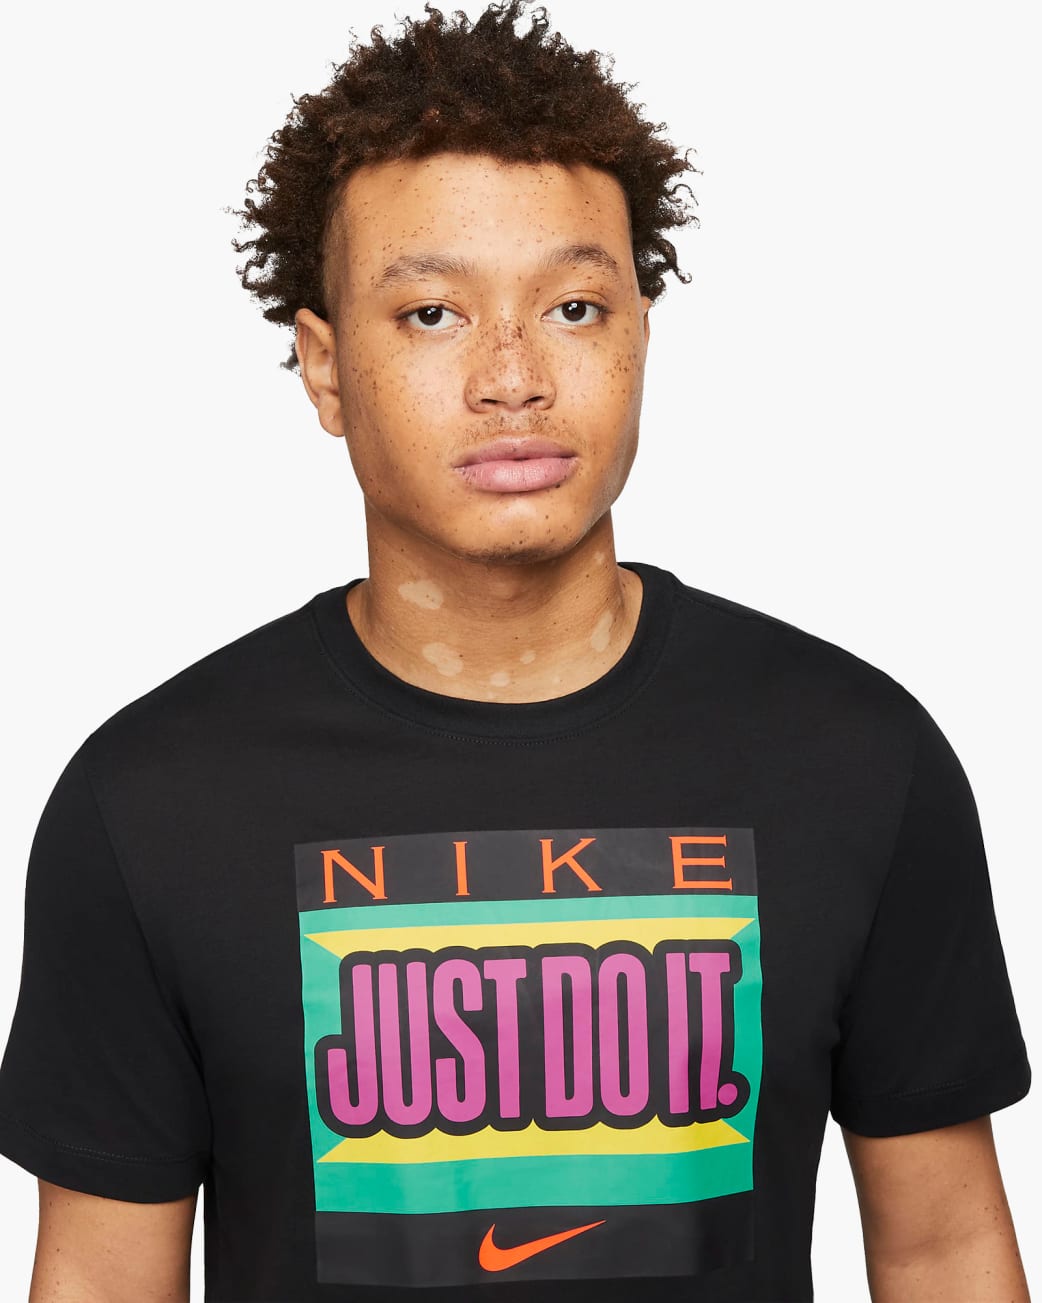 Nike “Just Do It” Graphic Training Men's - Black | Rogue Fitness